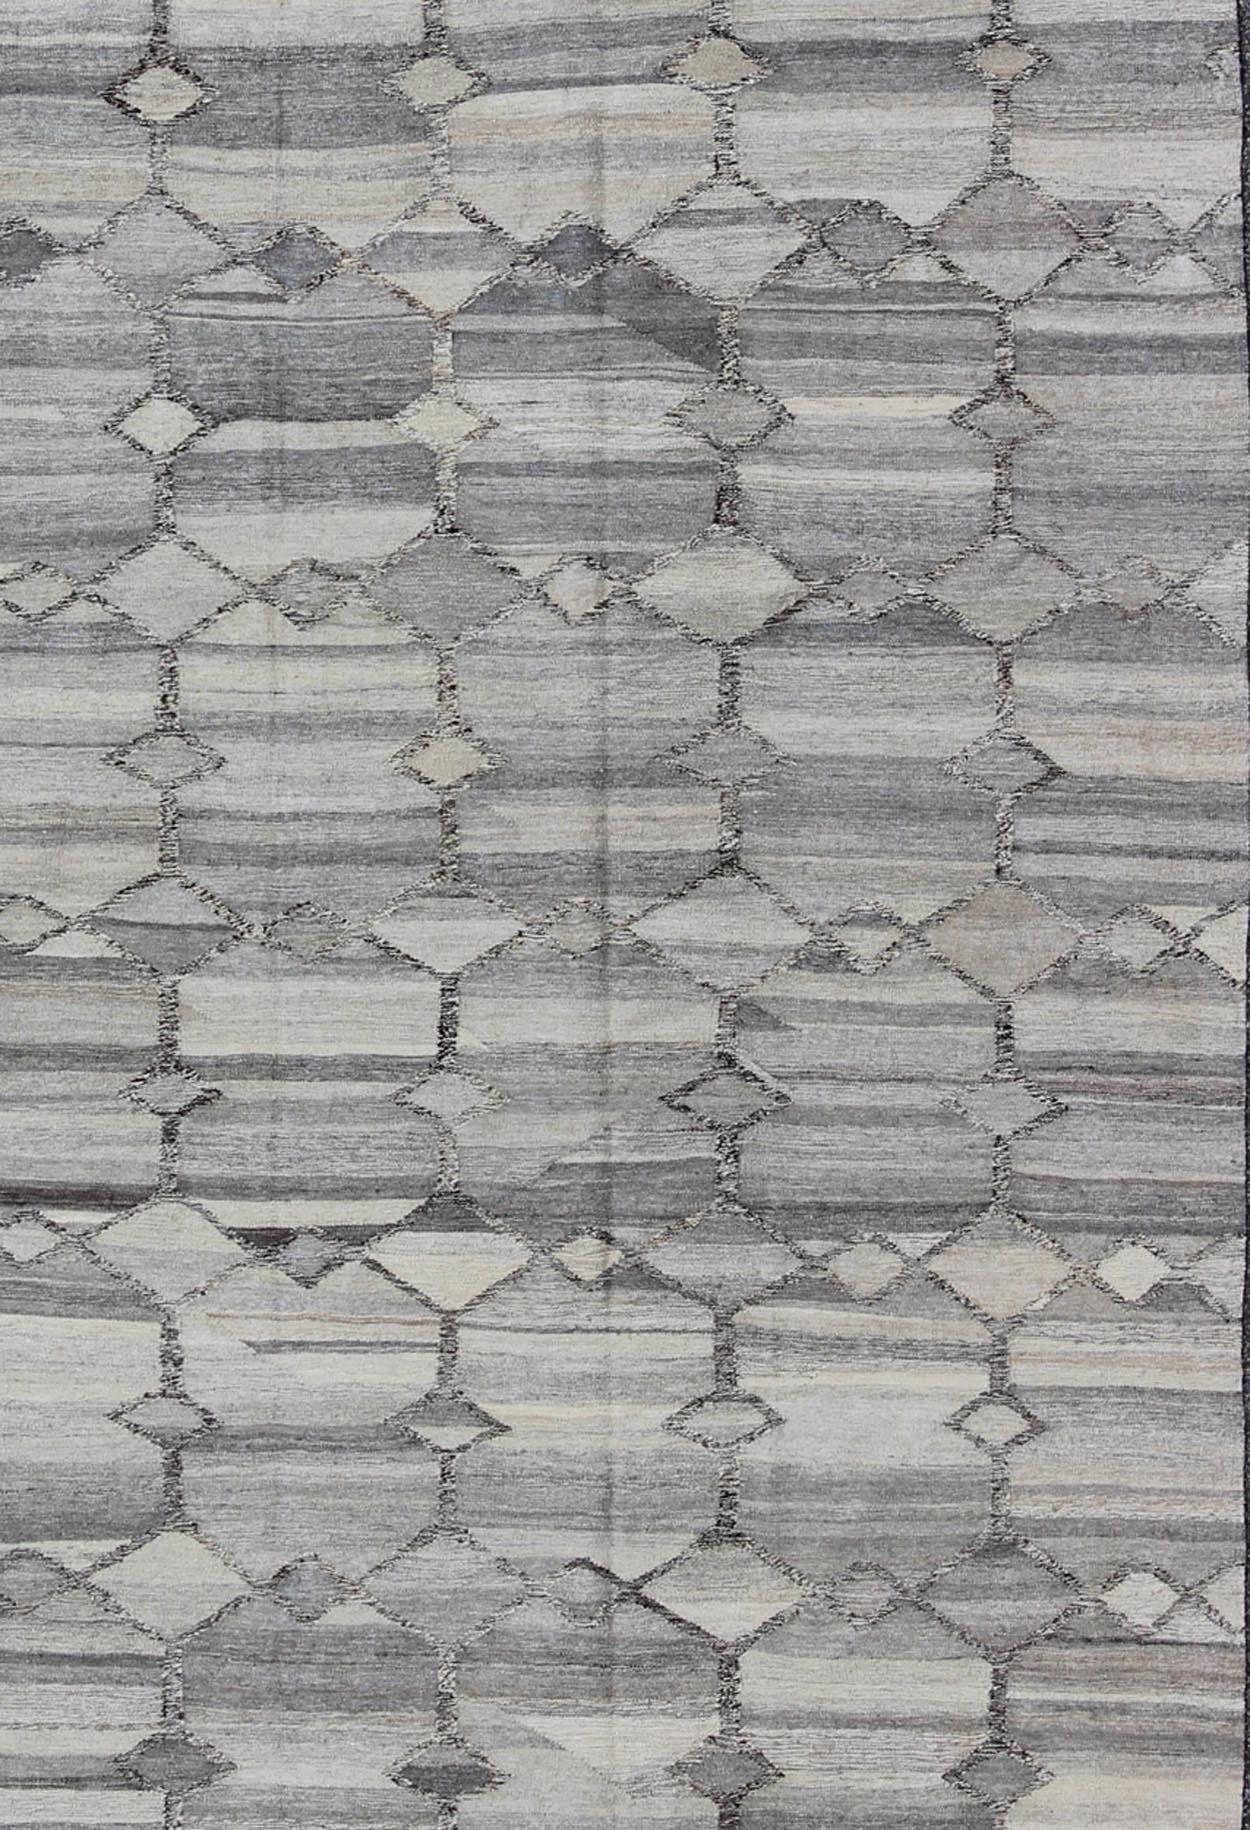 Versatile and neutral color-tone flat-weave Kilim for a Modern interiors as well a casual interiors. Keivan Woven Arts/ rug 17-0908, country of origin / type: Afghanistan / Kilim

Measures: 7'9 x 9'9

with a Minimalist floor design this silver